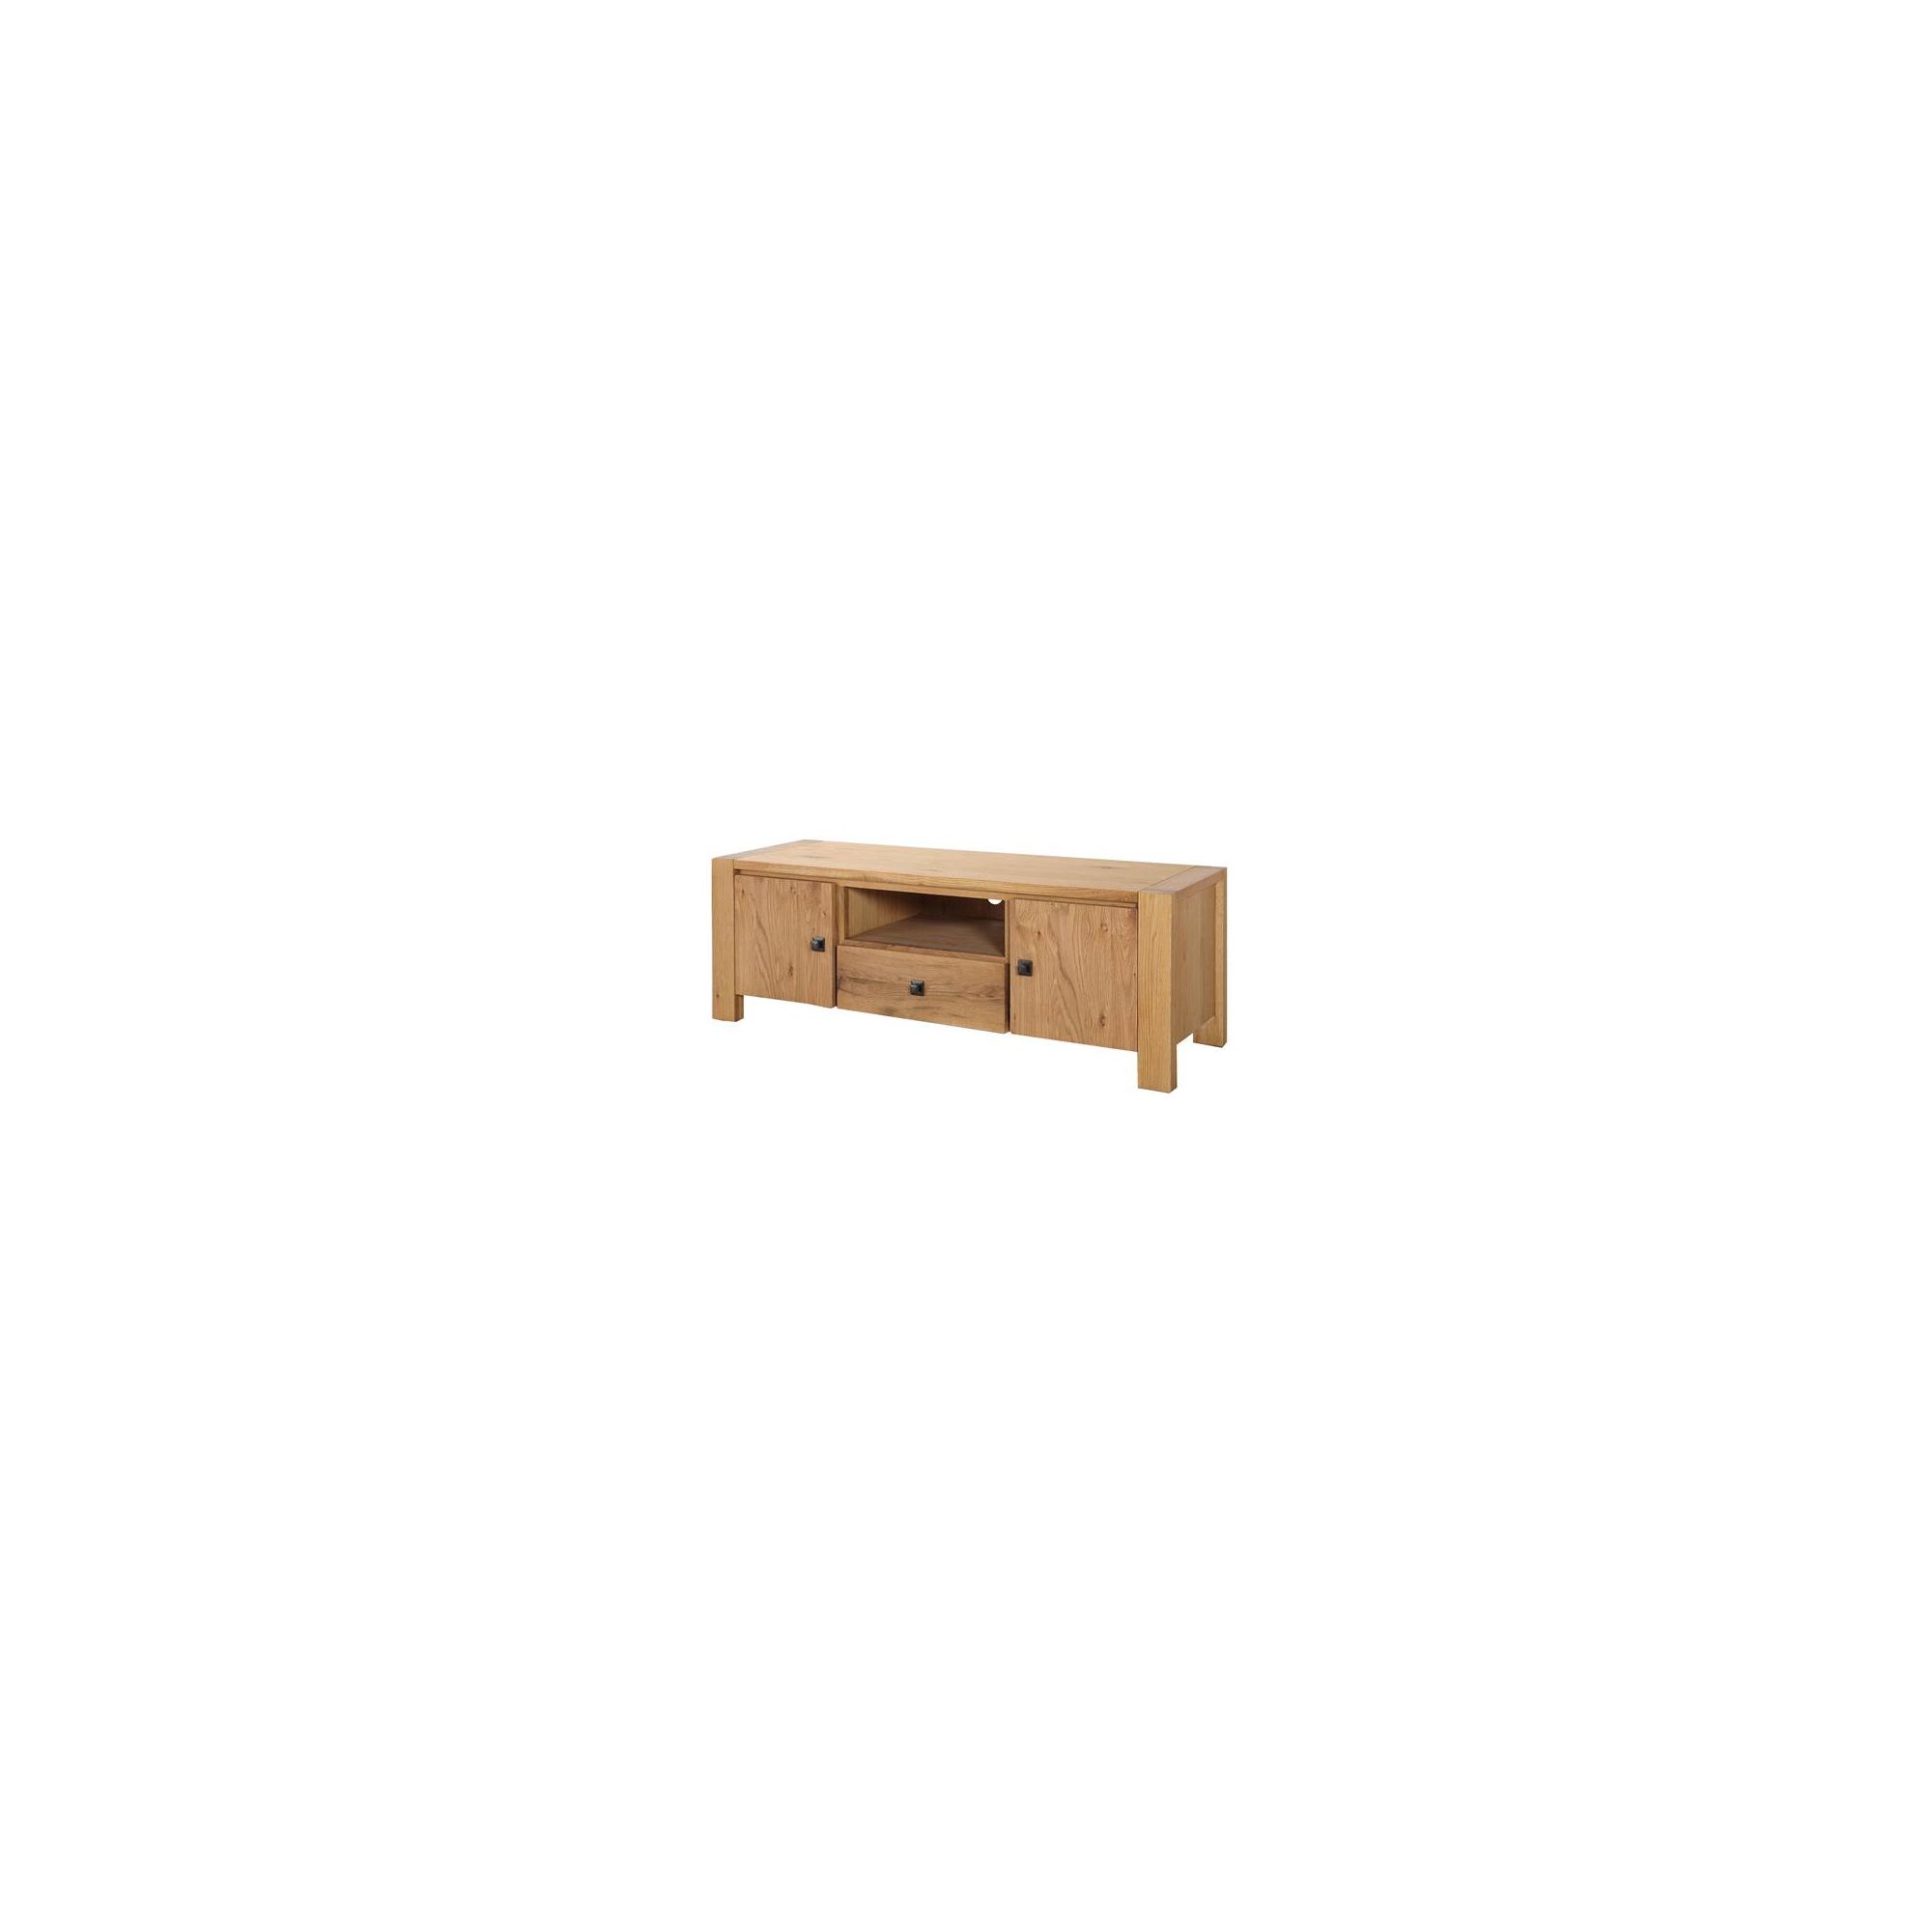 Oakinsen Clermont TV Cabinet at Tesco Direct